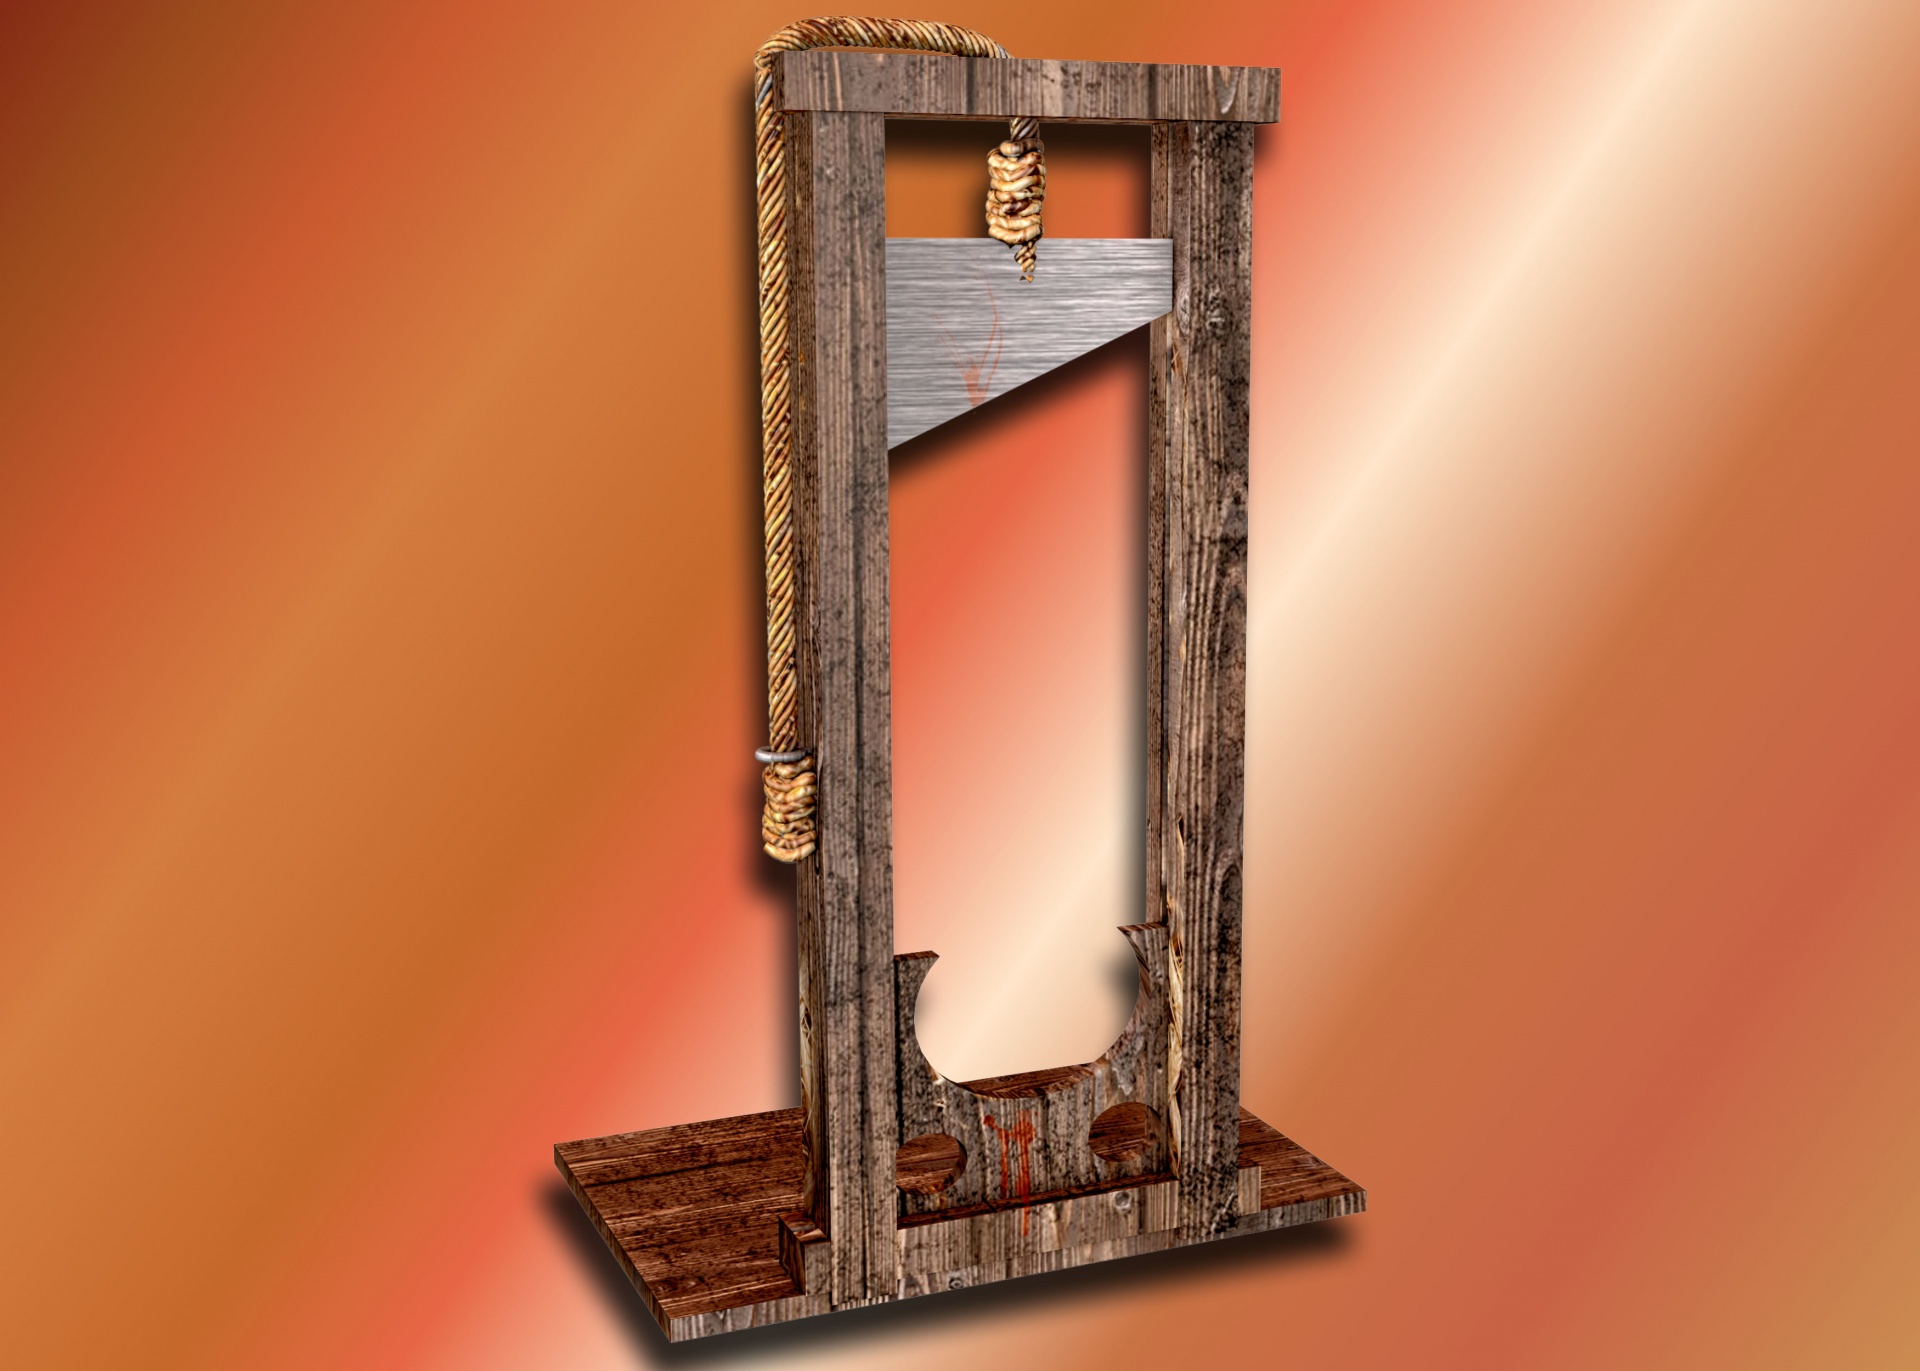 guillotine death penalty torture free photo